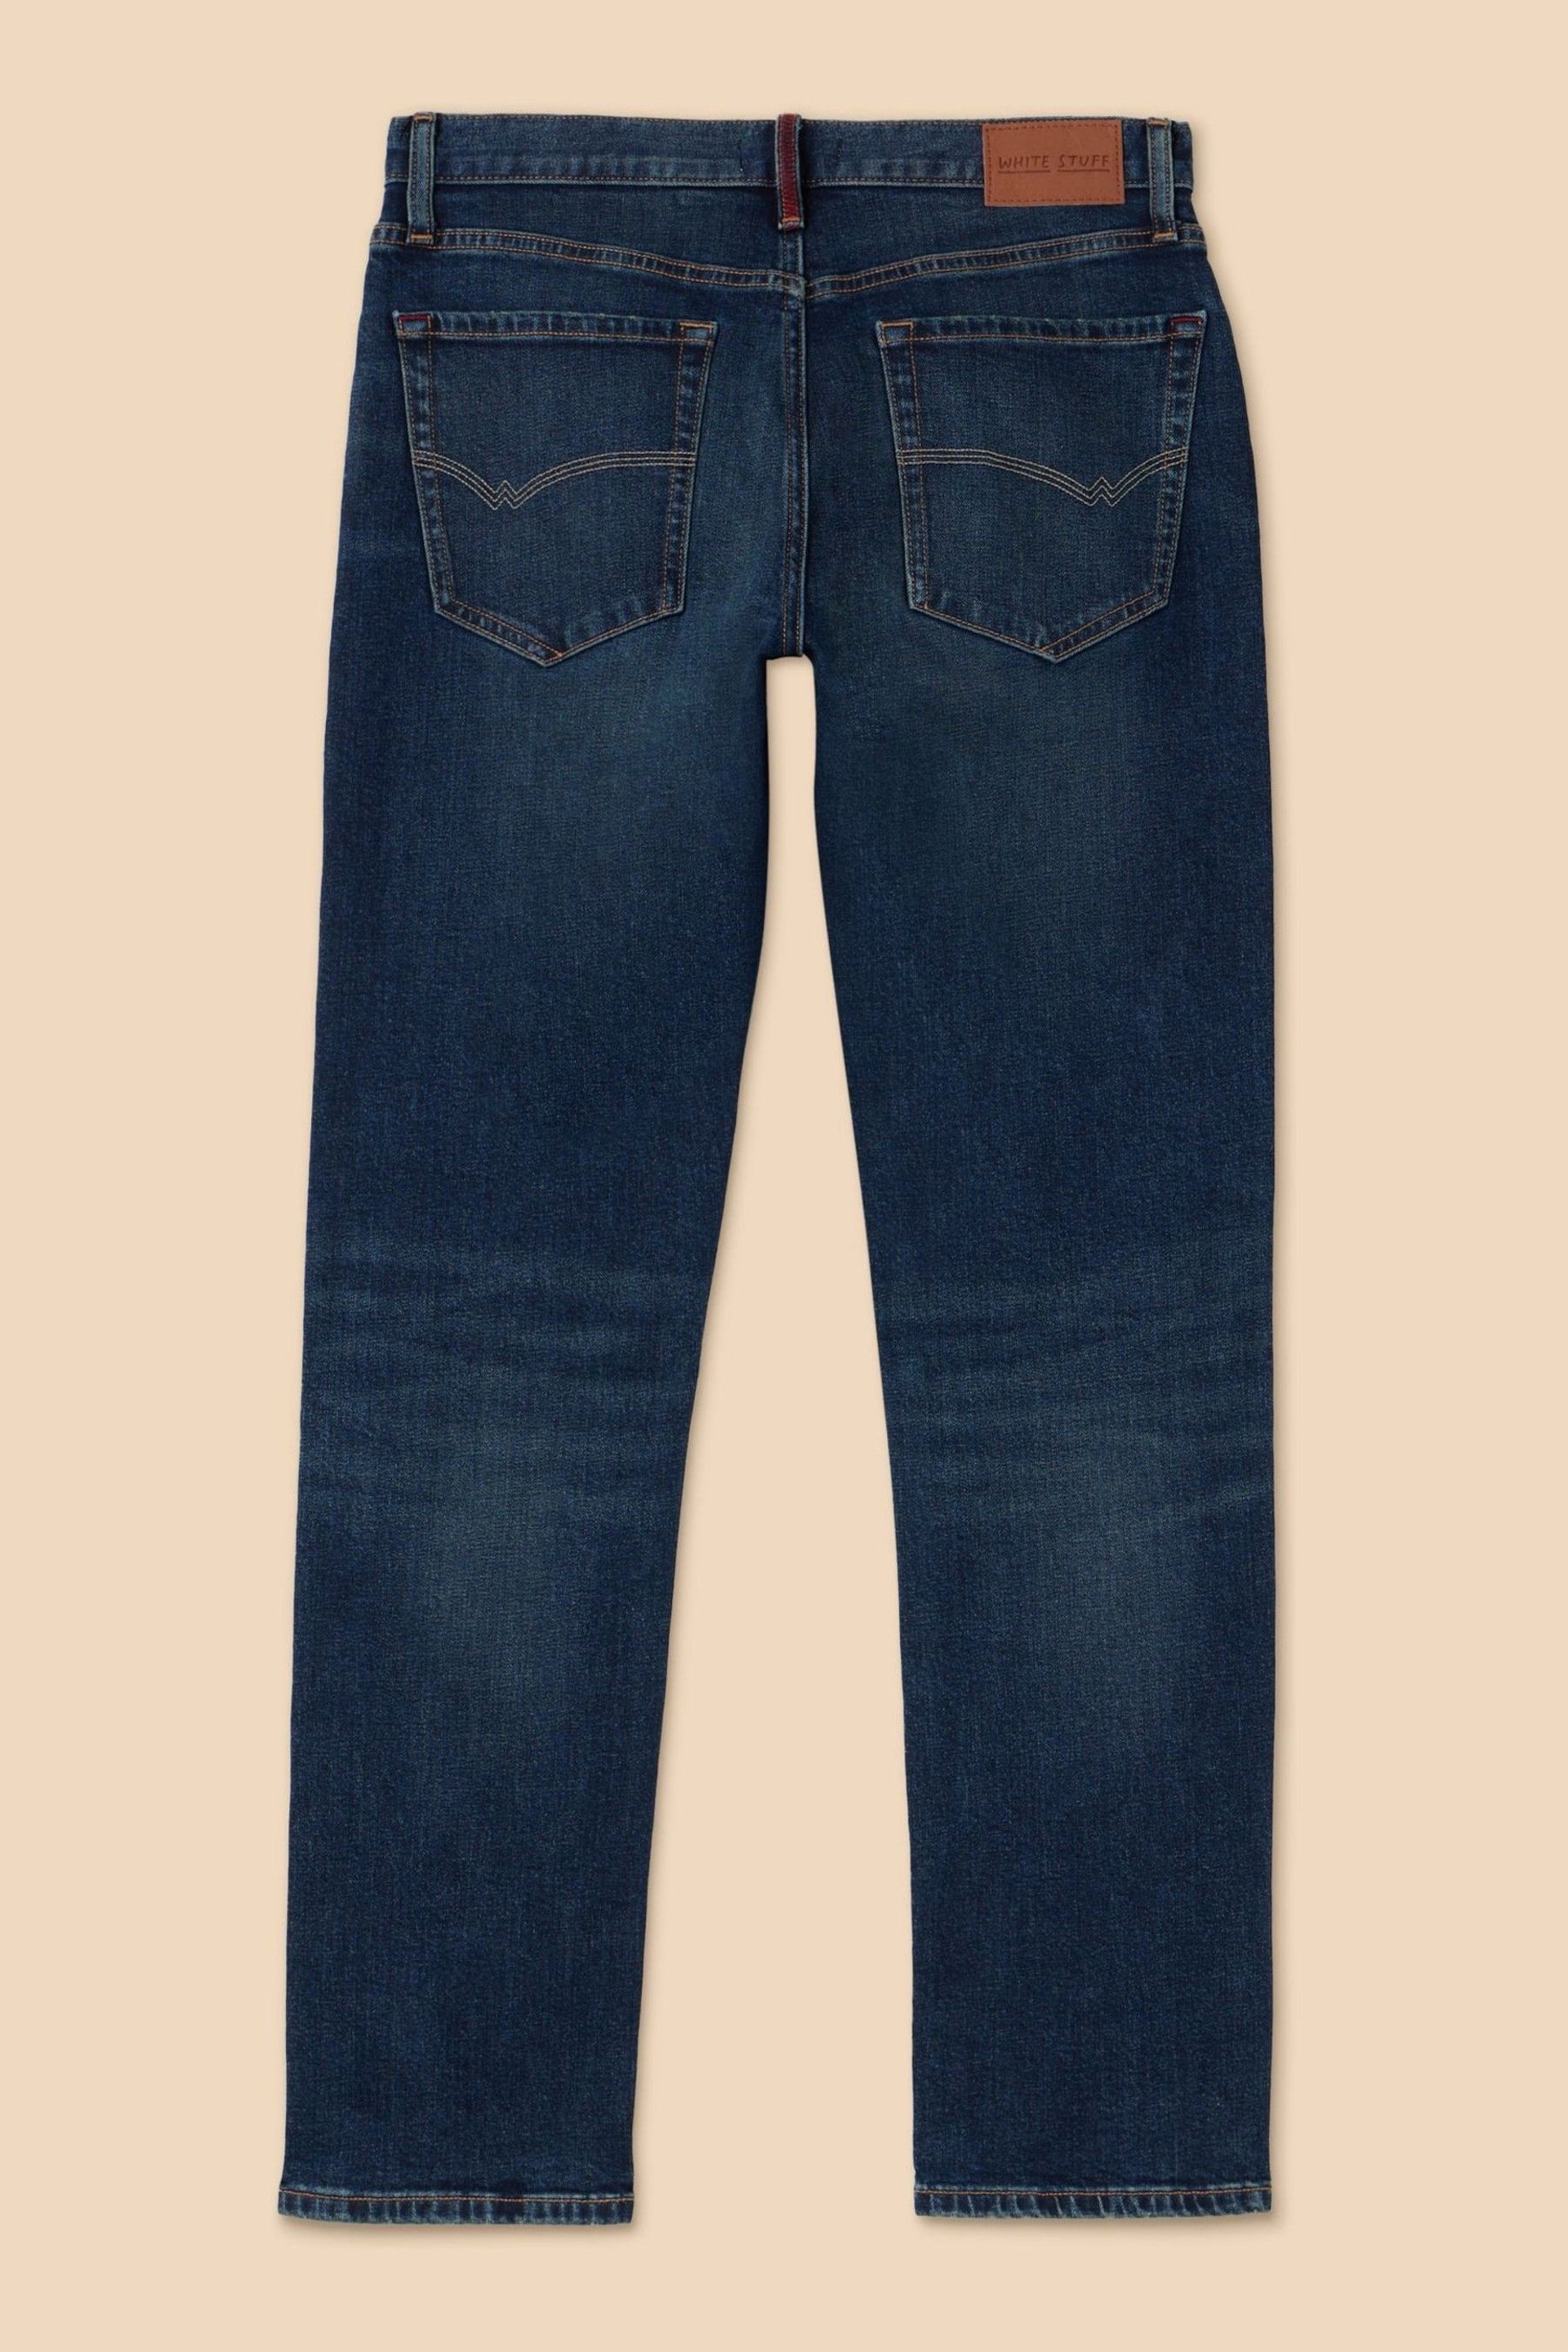 White Stuff Blue Eastwood Straight Jeans - Image 6 of 7